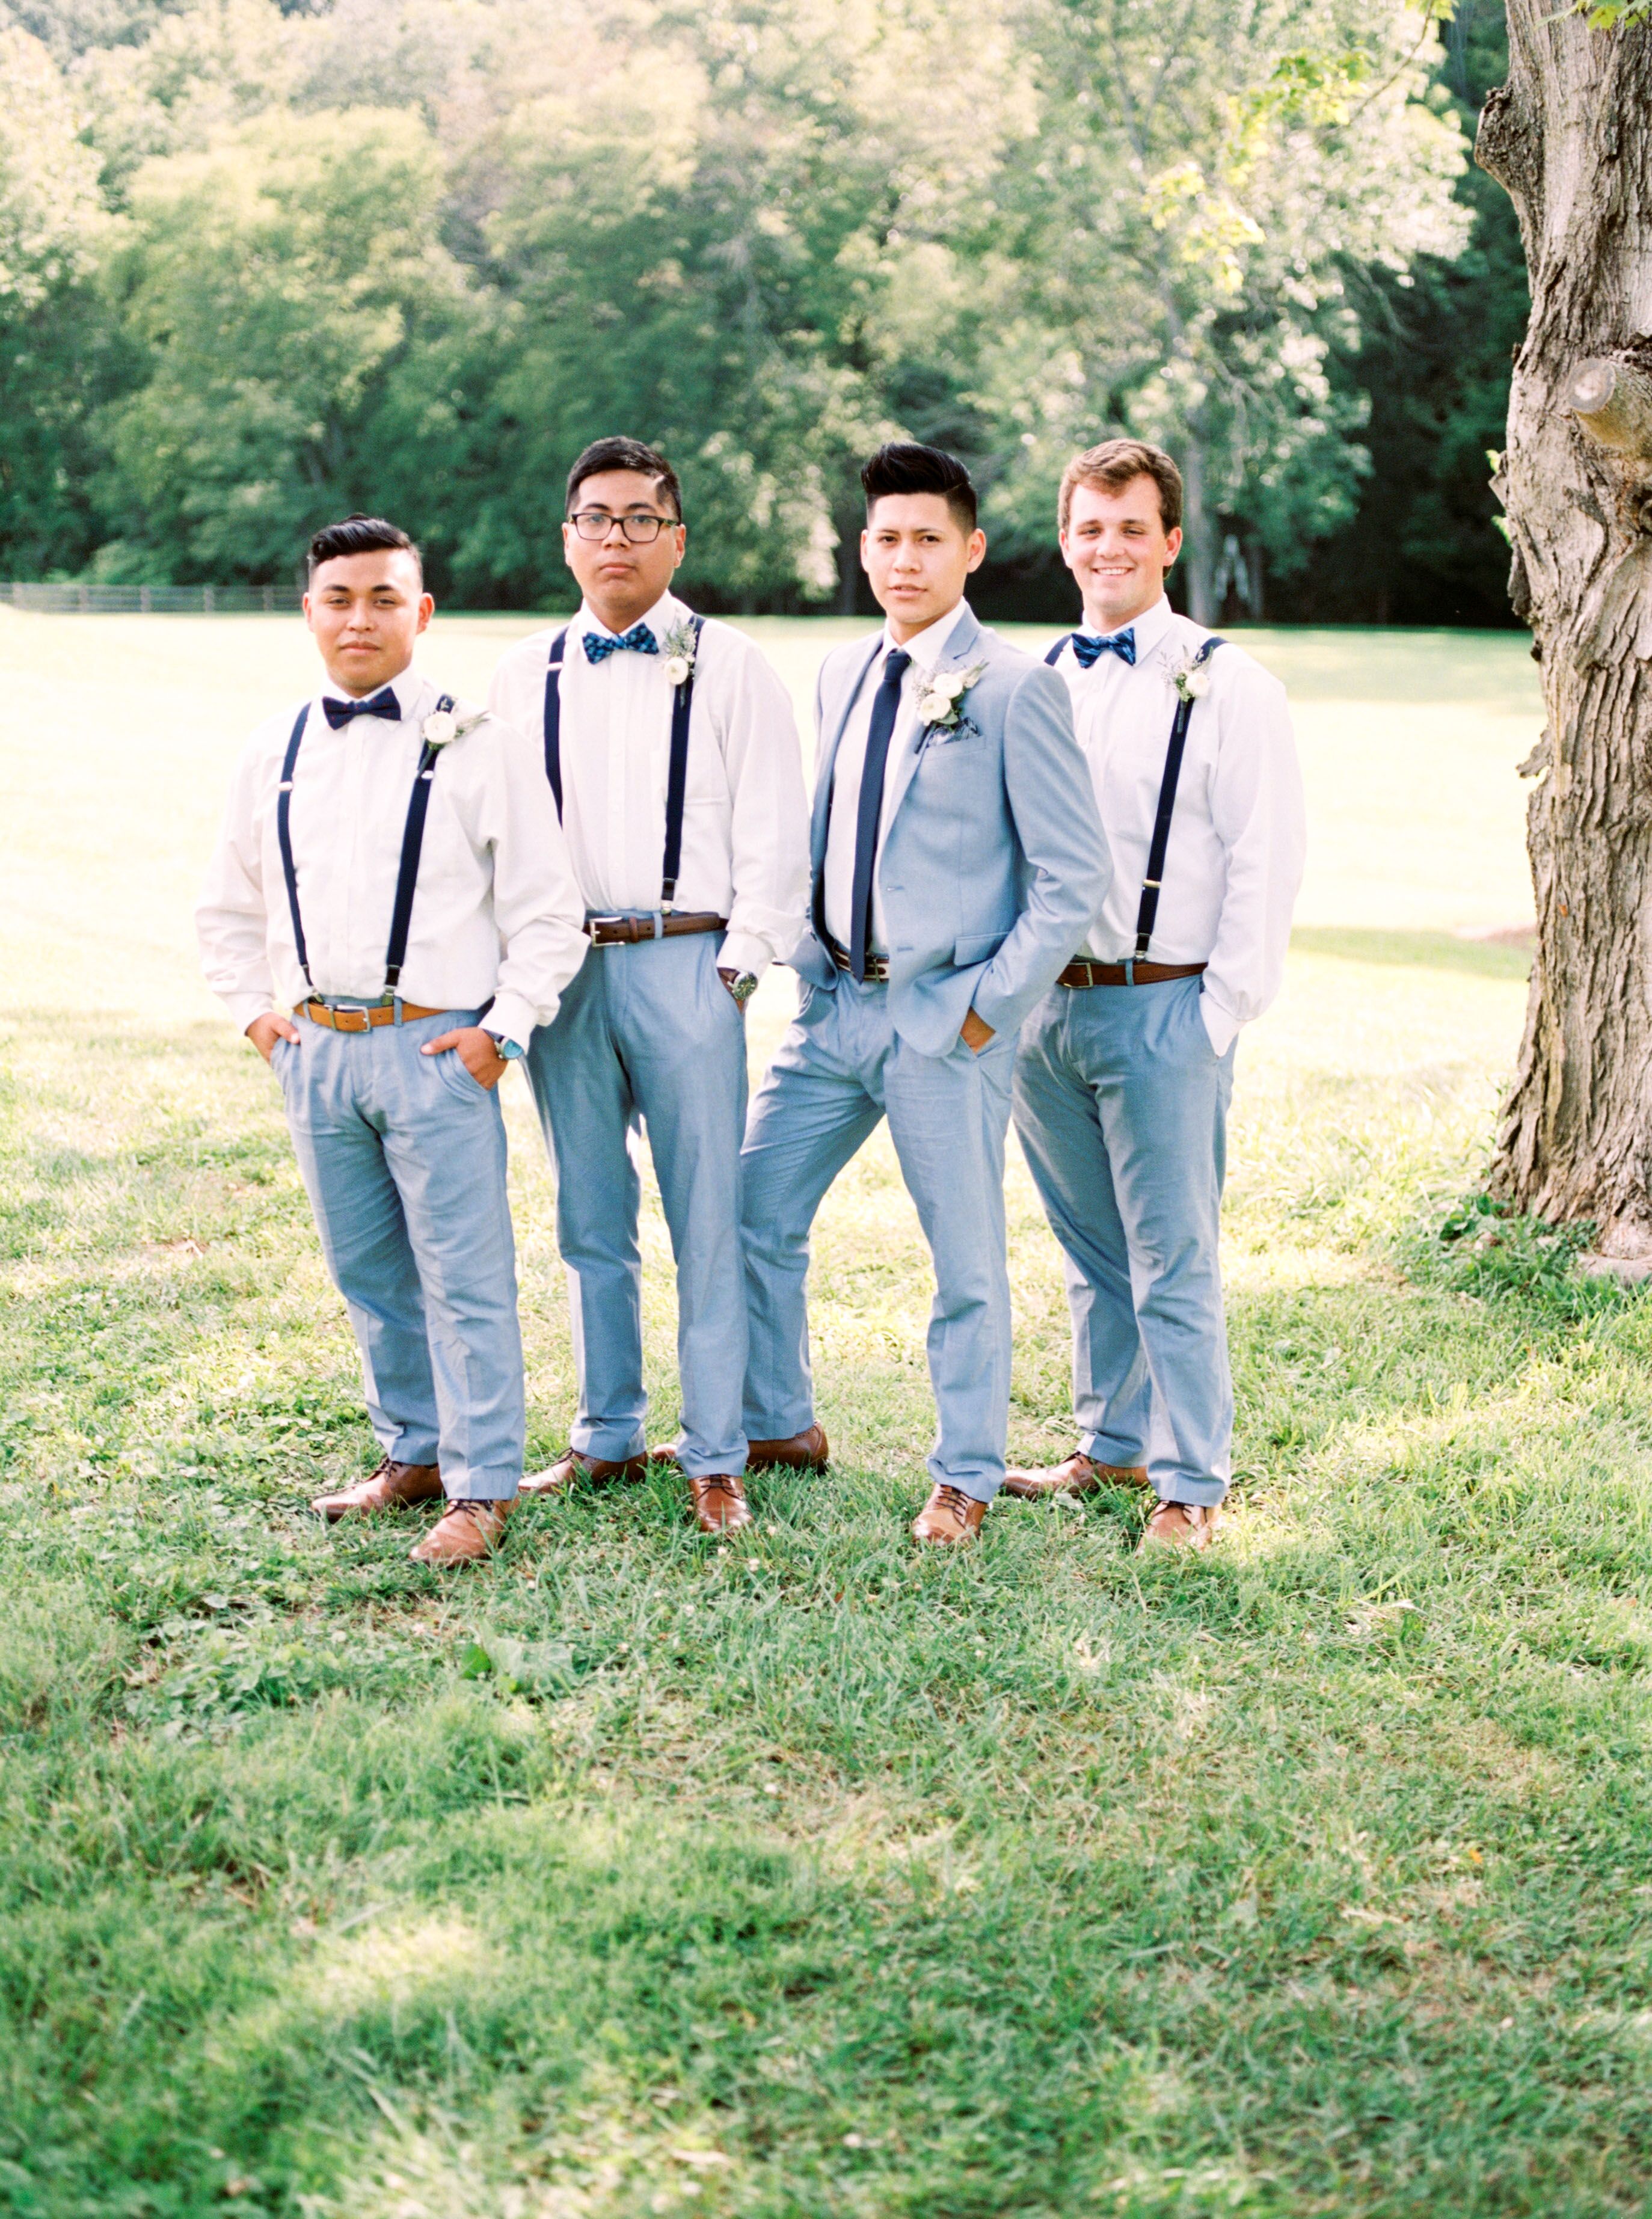 Pale Blue Trousers, Suspenders and Bow Ties